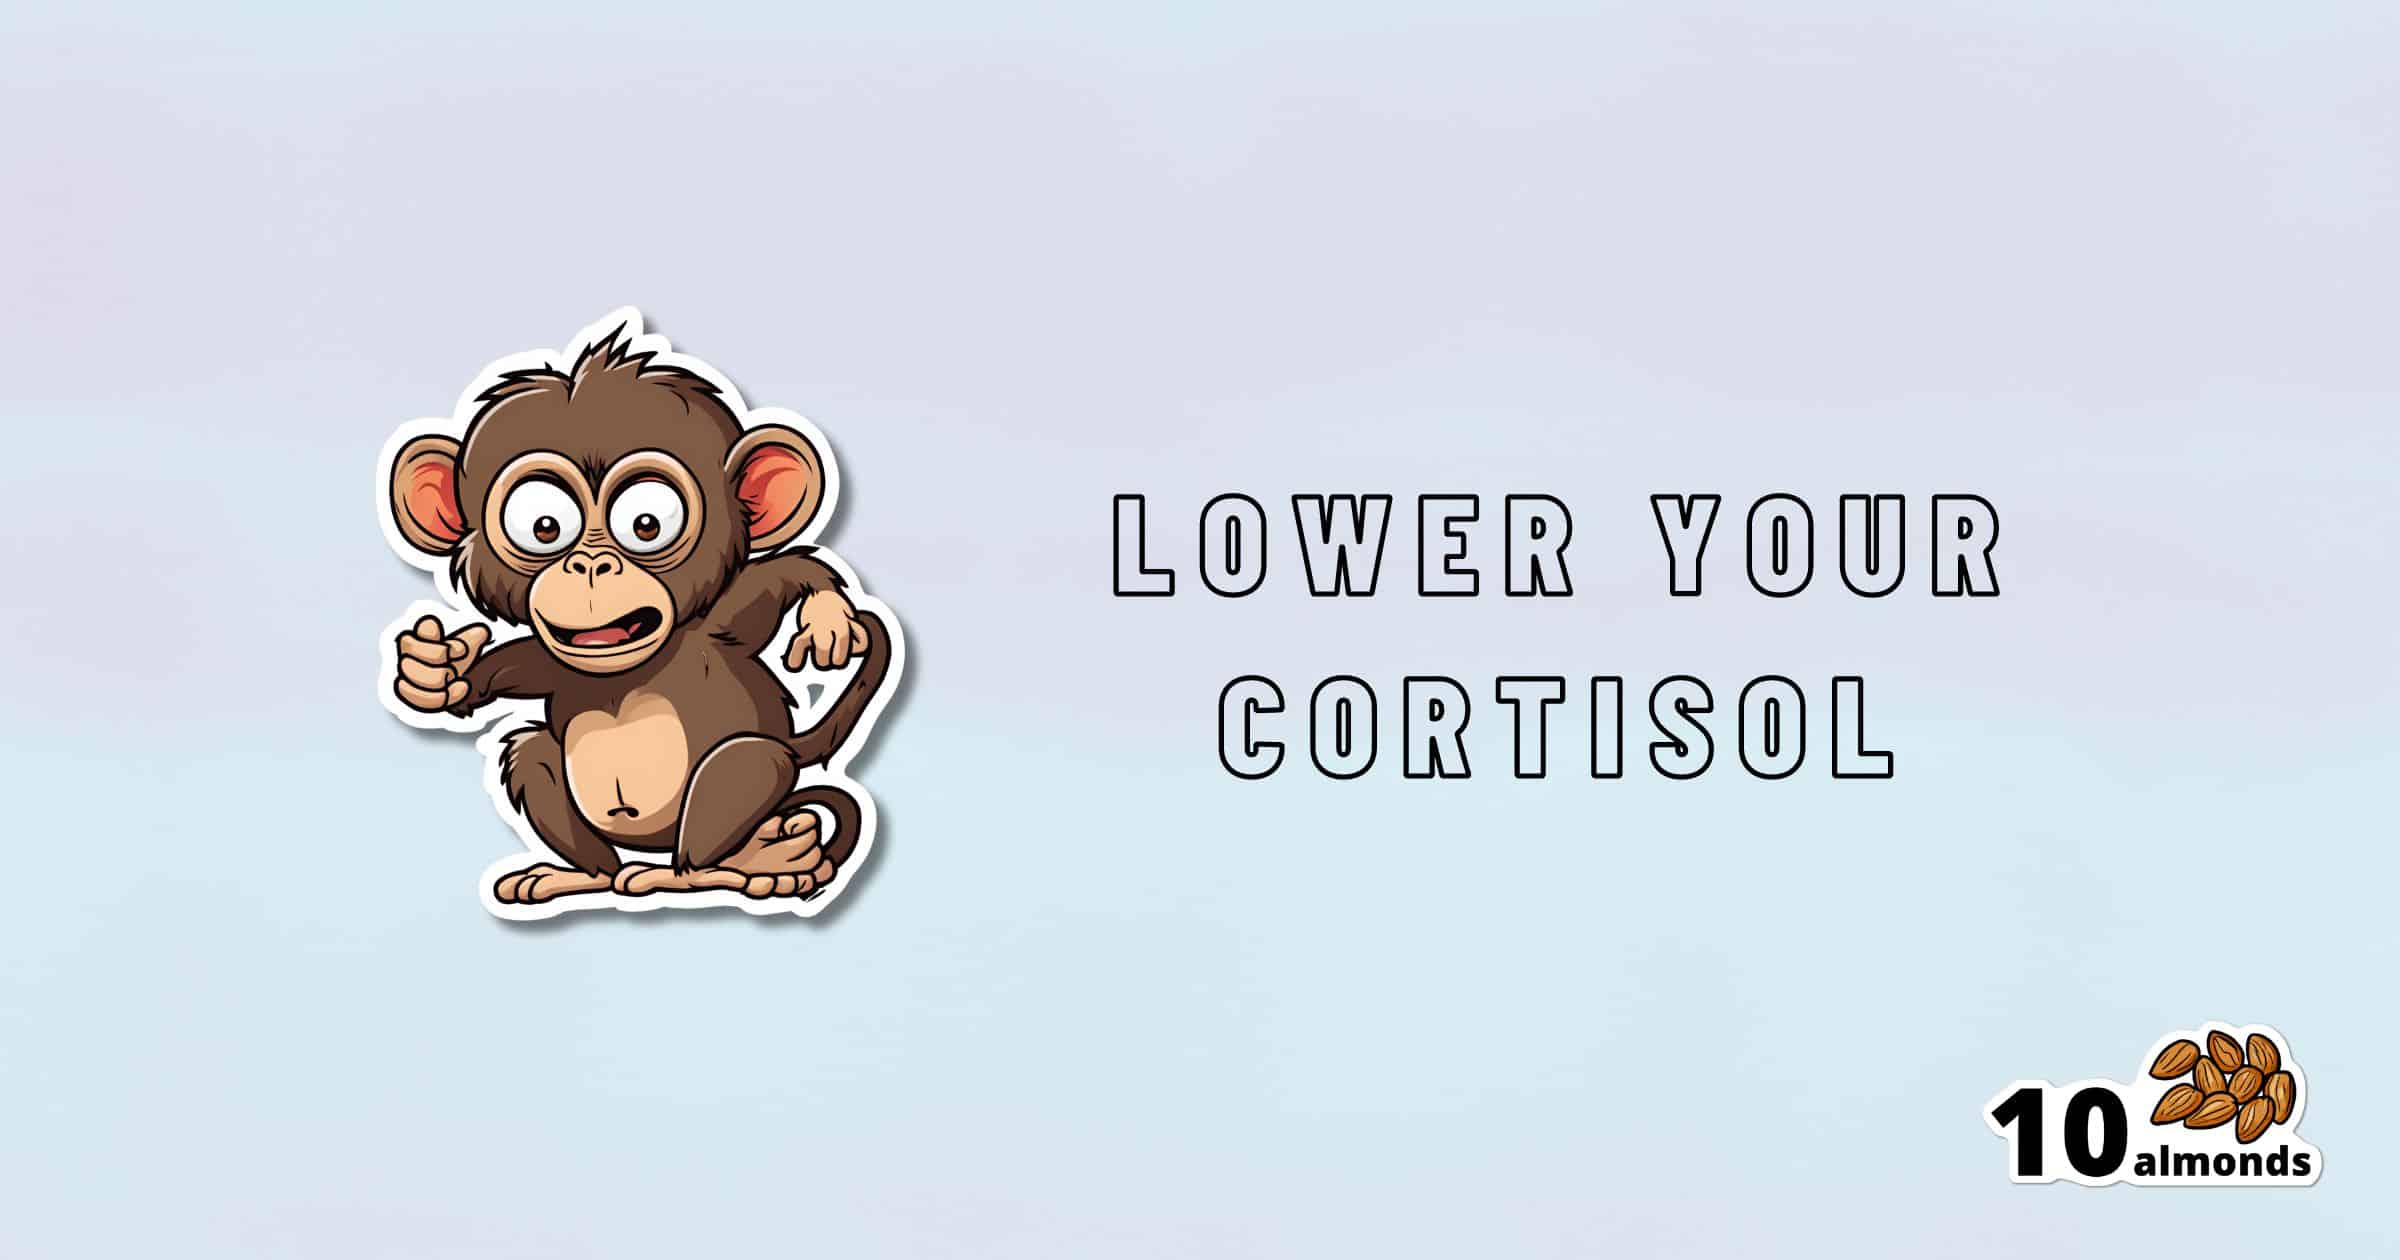 A cartoon monkey with a concerned expression is to the left of the text "LOWER YOUR CORTISOL" written in bold, uppercase letters. A small graphic of 10 almonds is in the bottom right corner, highlighting a natural cortisol reduction method. The background features a light gradient from blue to white.